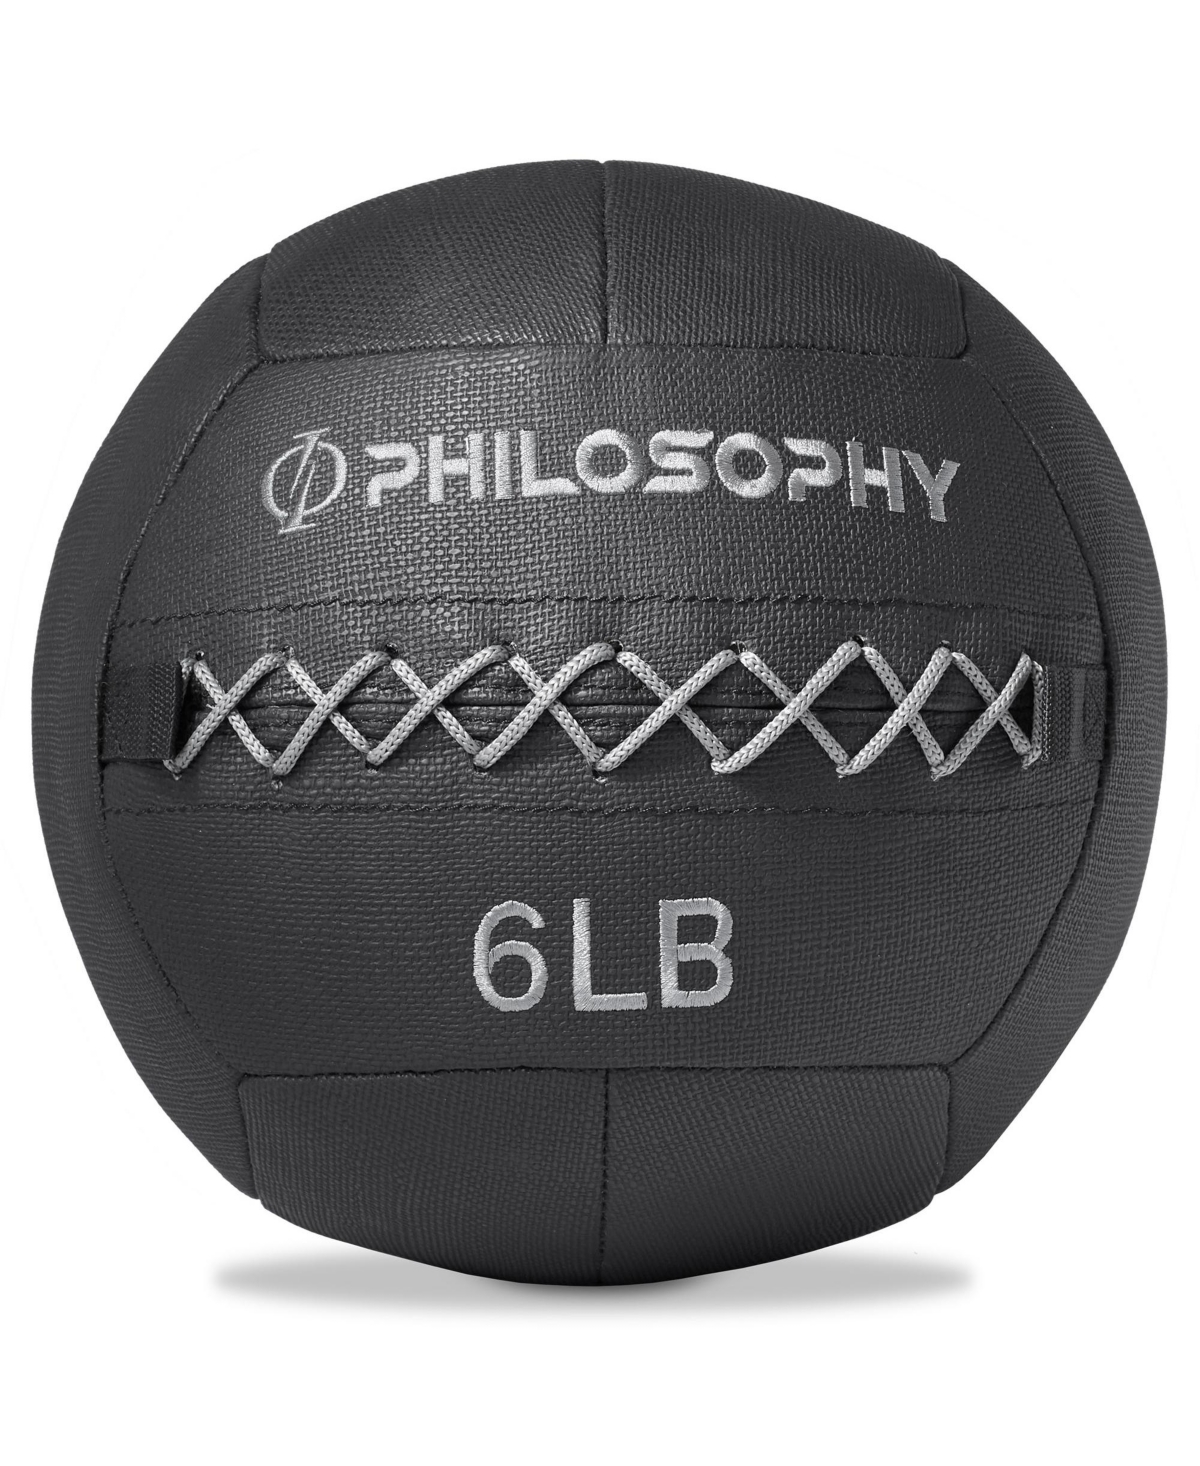 Wall Ball, 6 Lb - Soft Shell Weighted Medicine Ball with Non-Slip Grip - Black